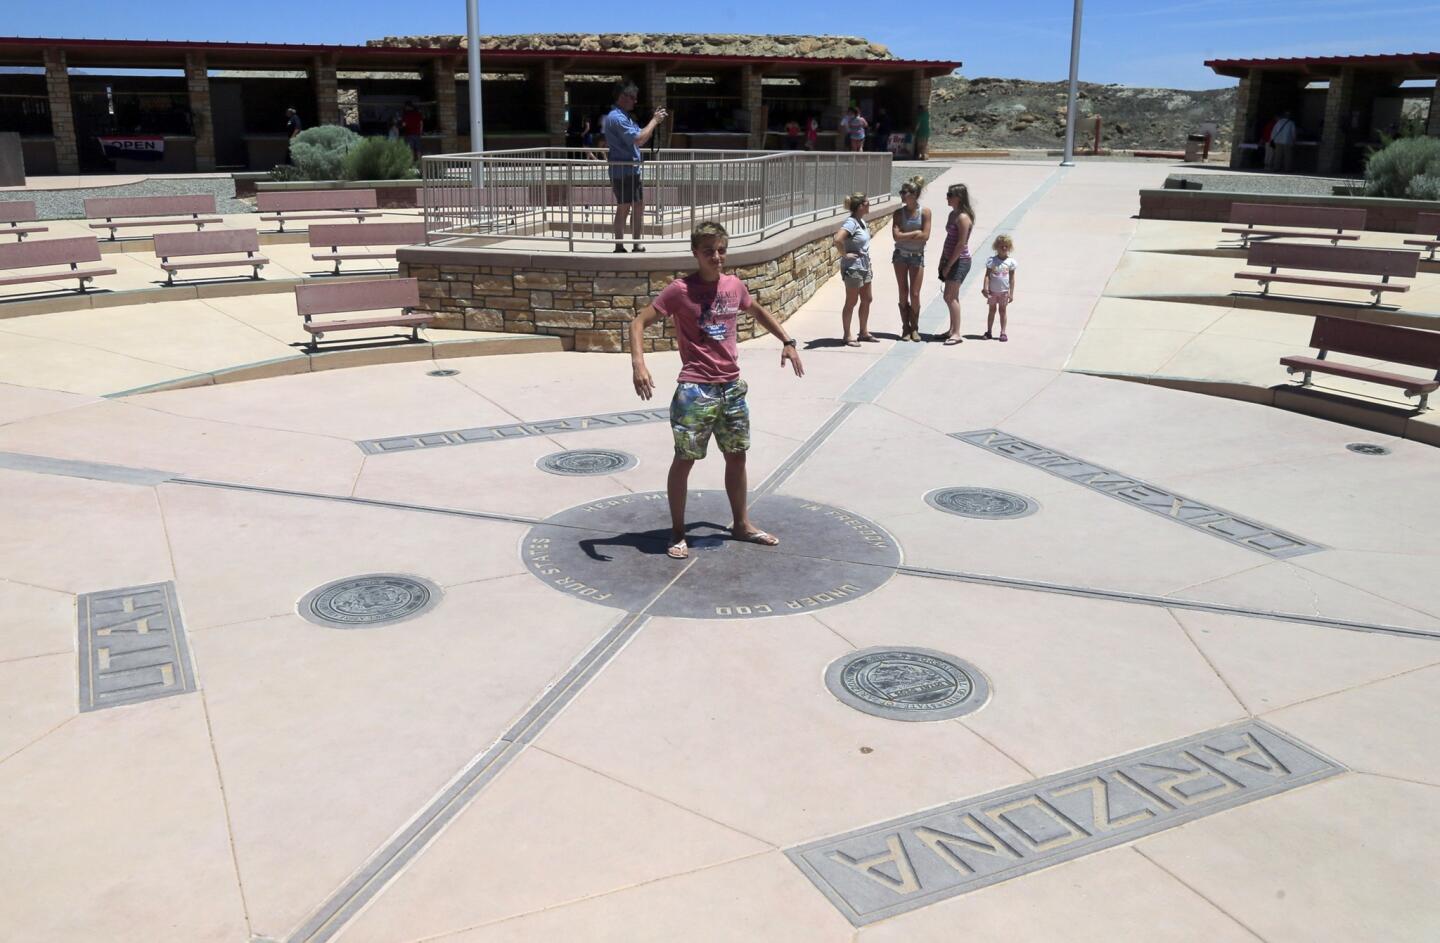 The Four Corners monument